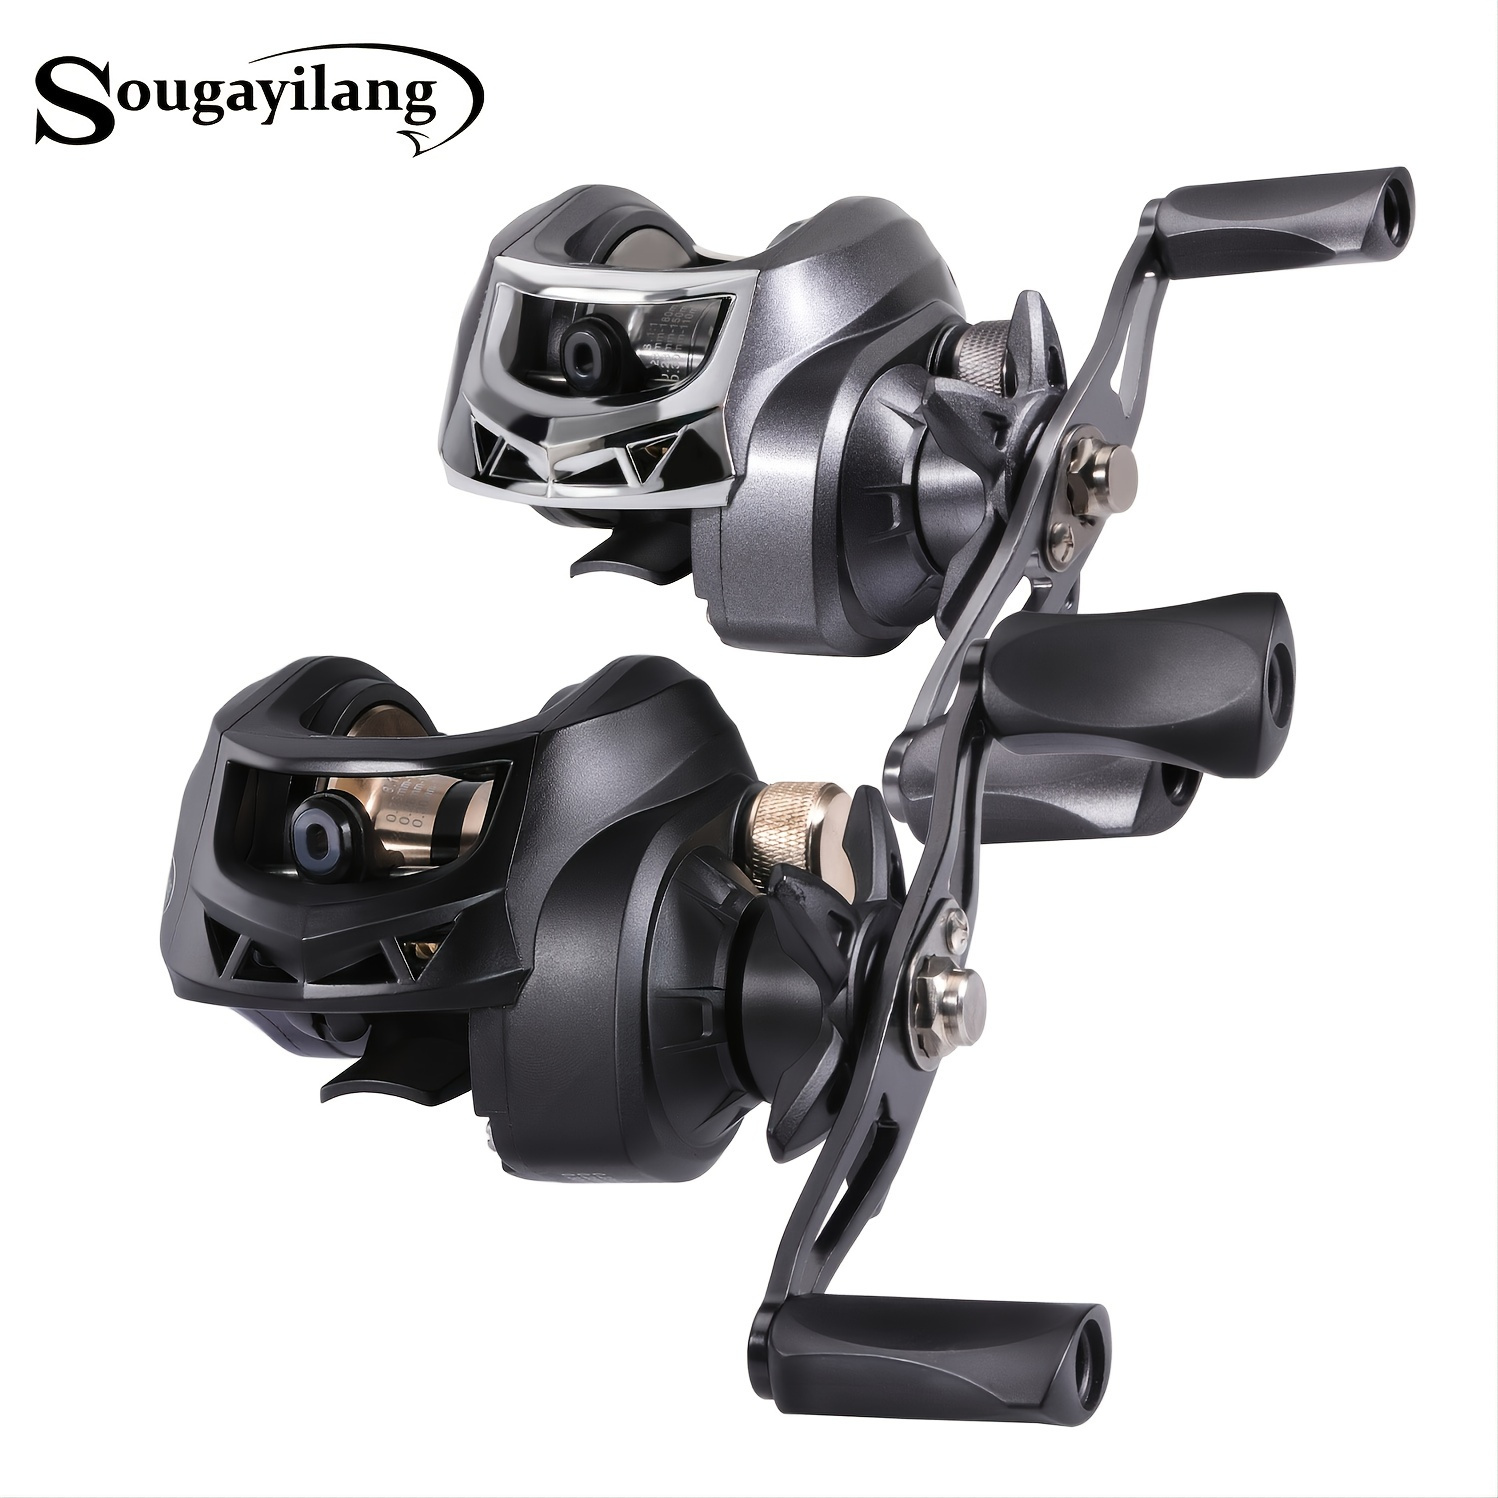 

Sougayilang Baitcasting Reel: 19+1bb 8.1:1 Gear Ratio, Magnetic Brake, Left/right Hand Lure Fishing Reel - Perfect For Freshwater & Saltwater Fishing!